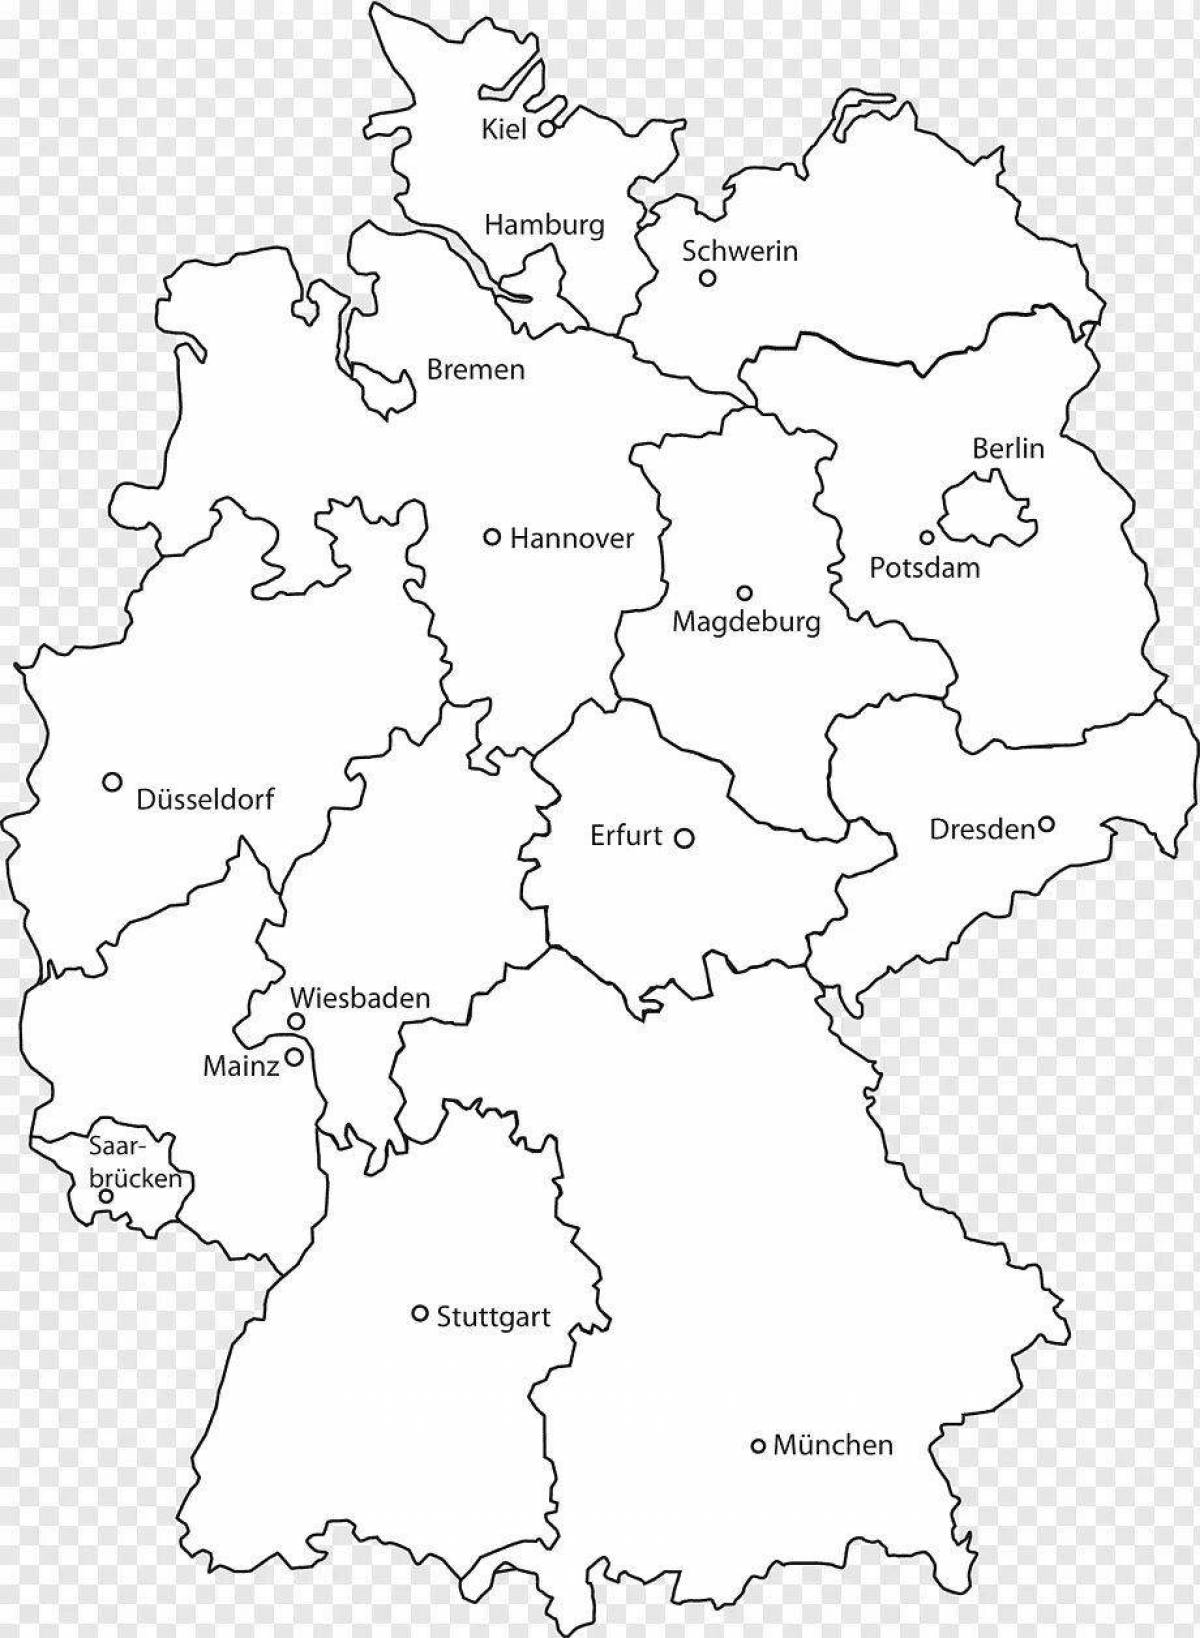 Coloring innovation map of germany